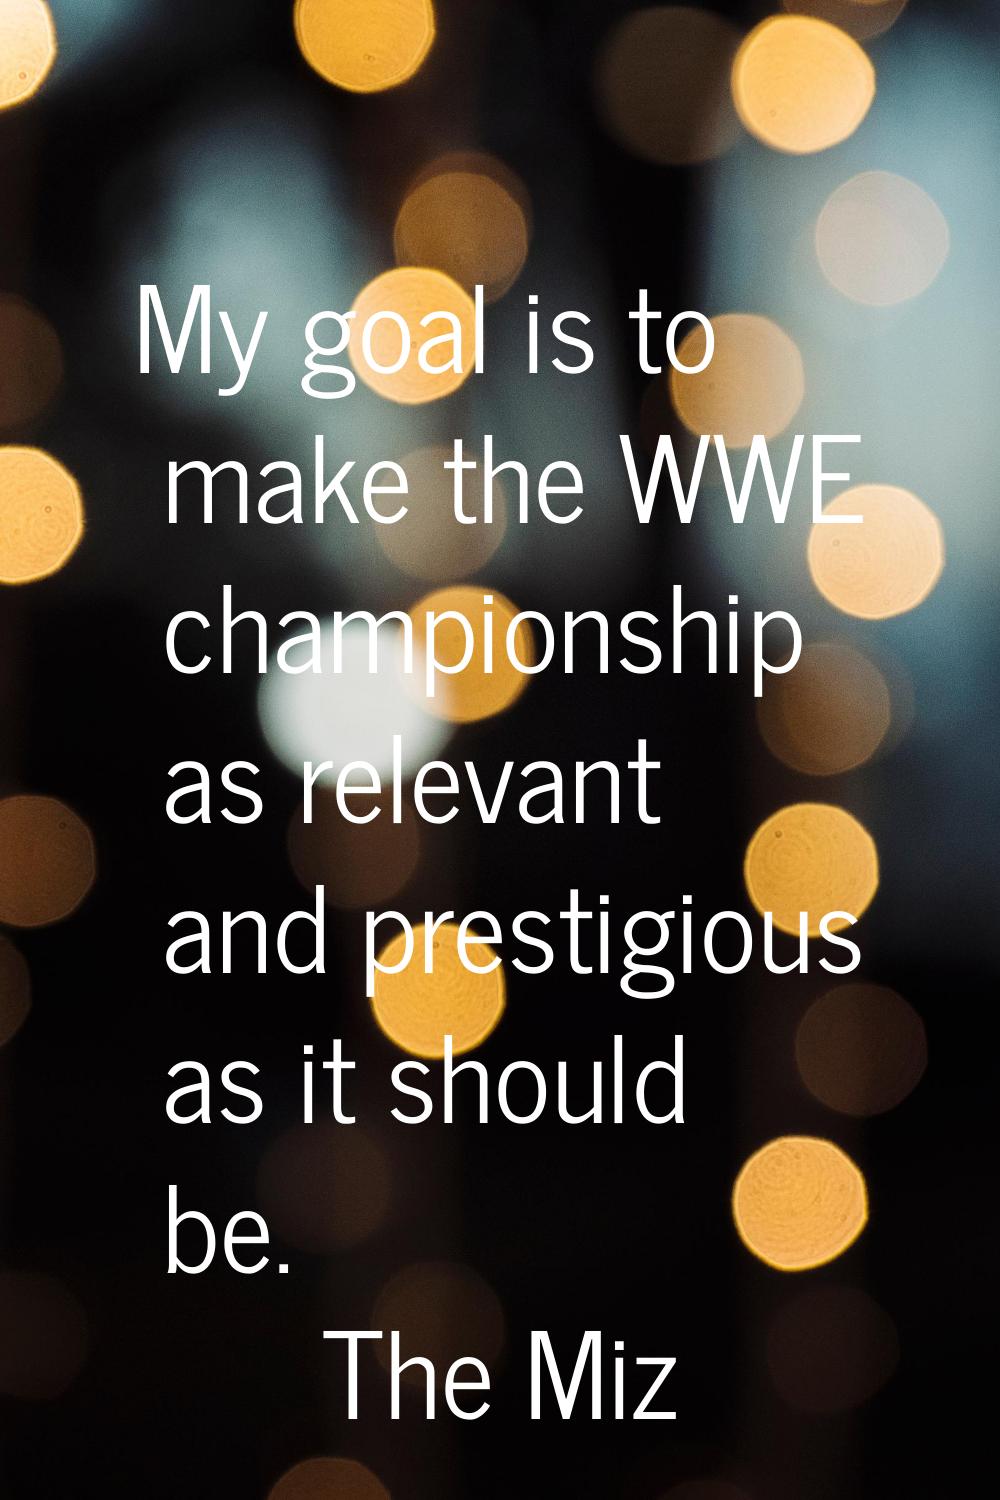 My goal is to make the WWE championship as relevant and prestigious as it should be.